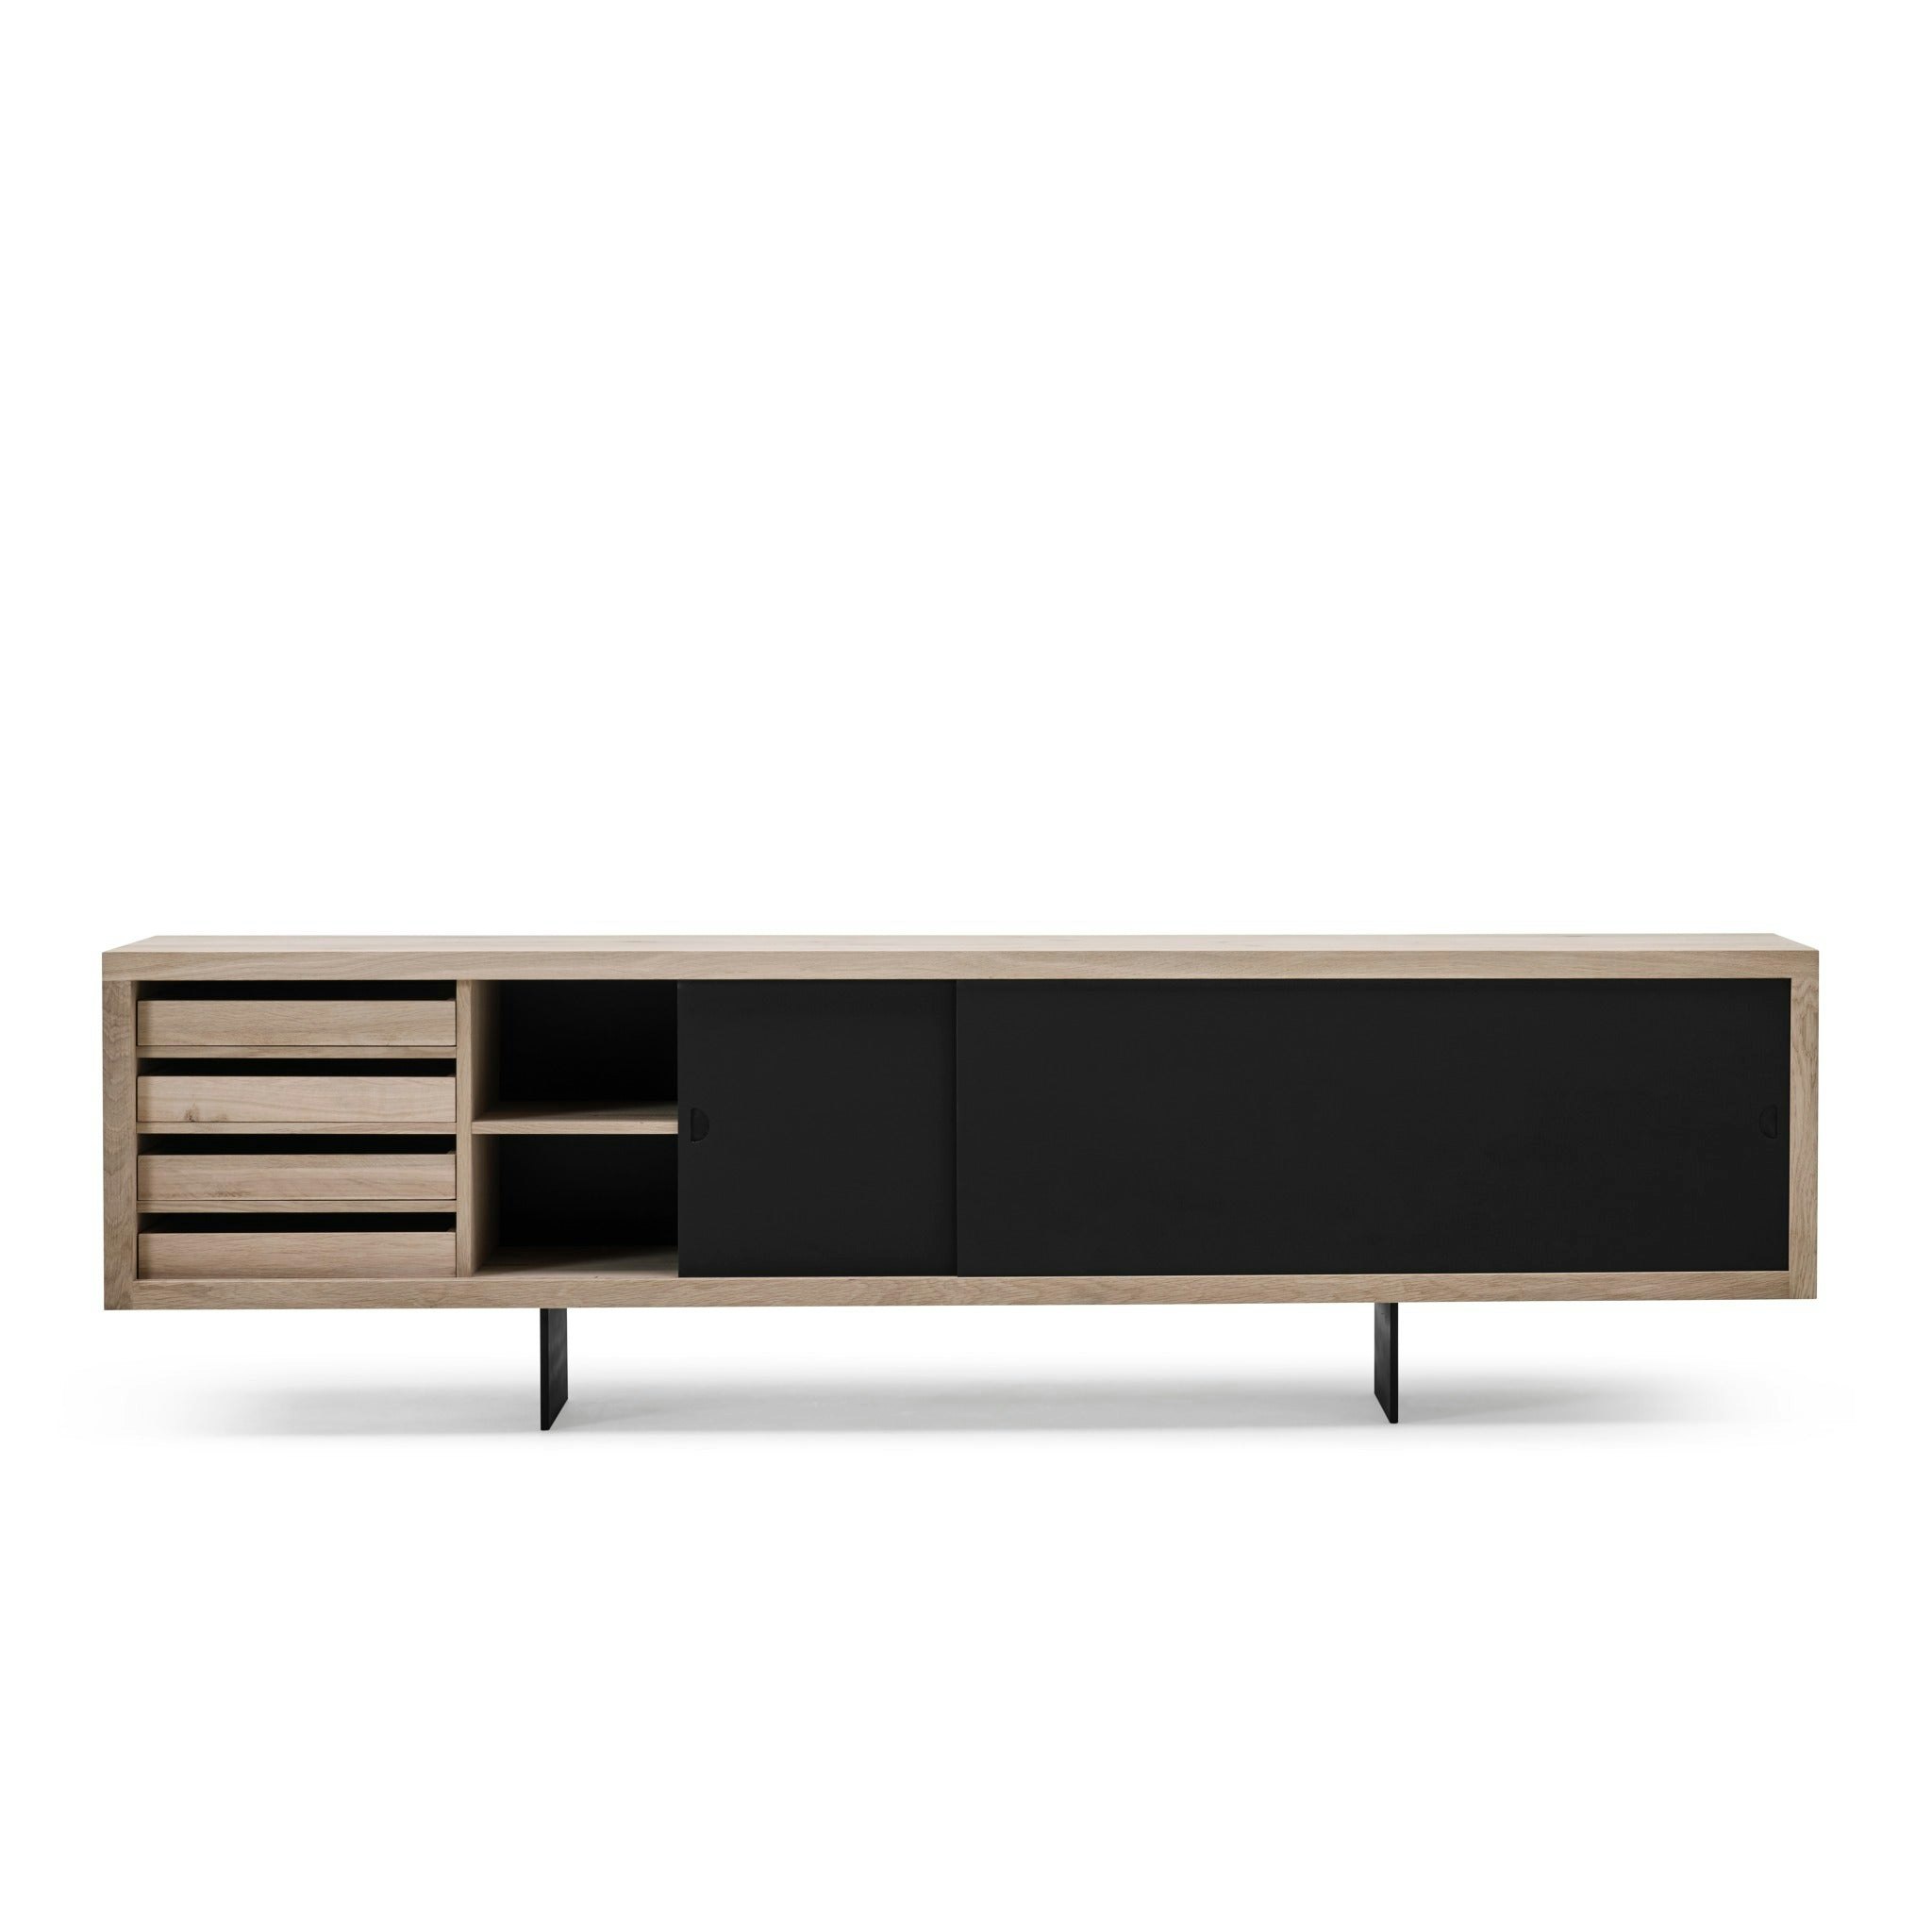 Grand Sideboard by Jacob Plejdrup for Dk3